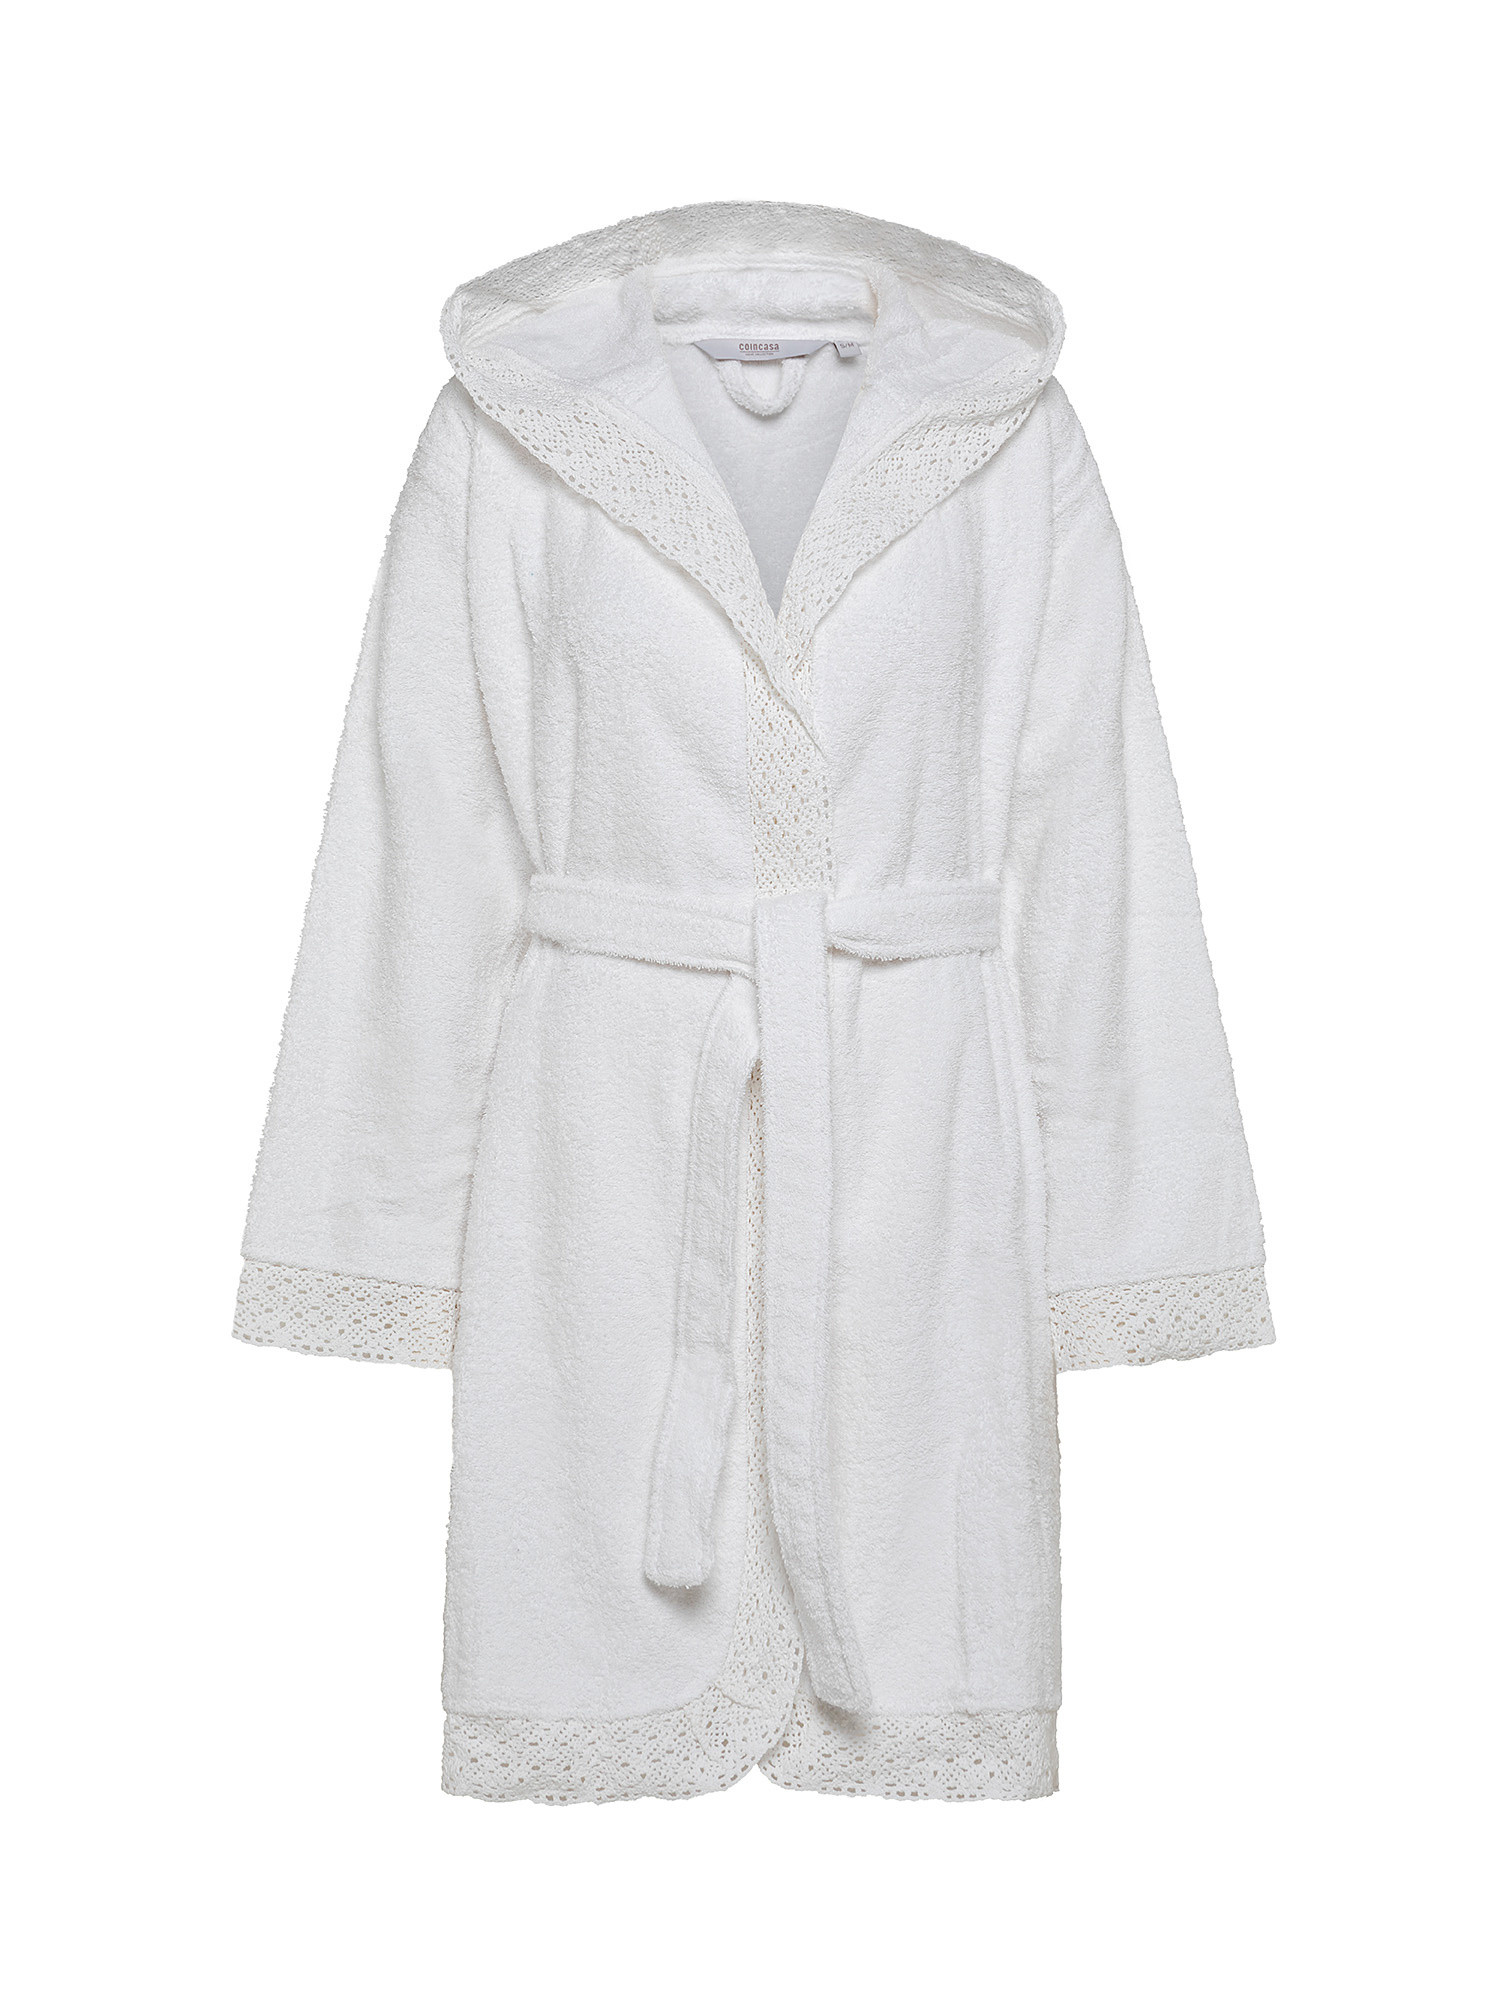 Cotton bathrobe with lace applications, White, large image number 0